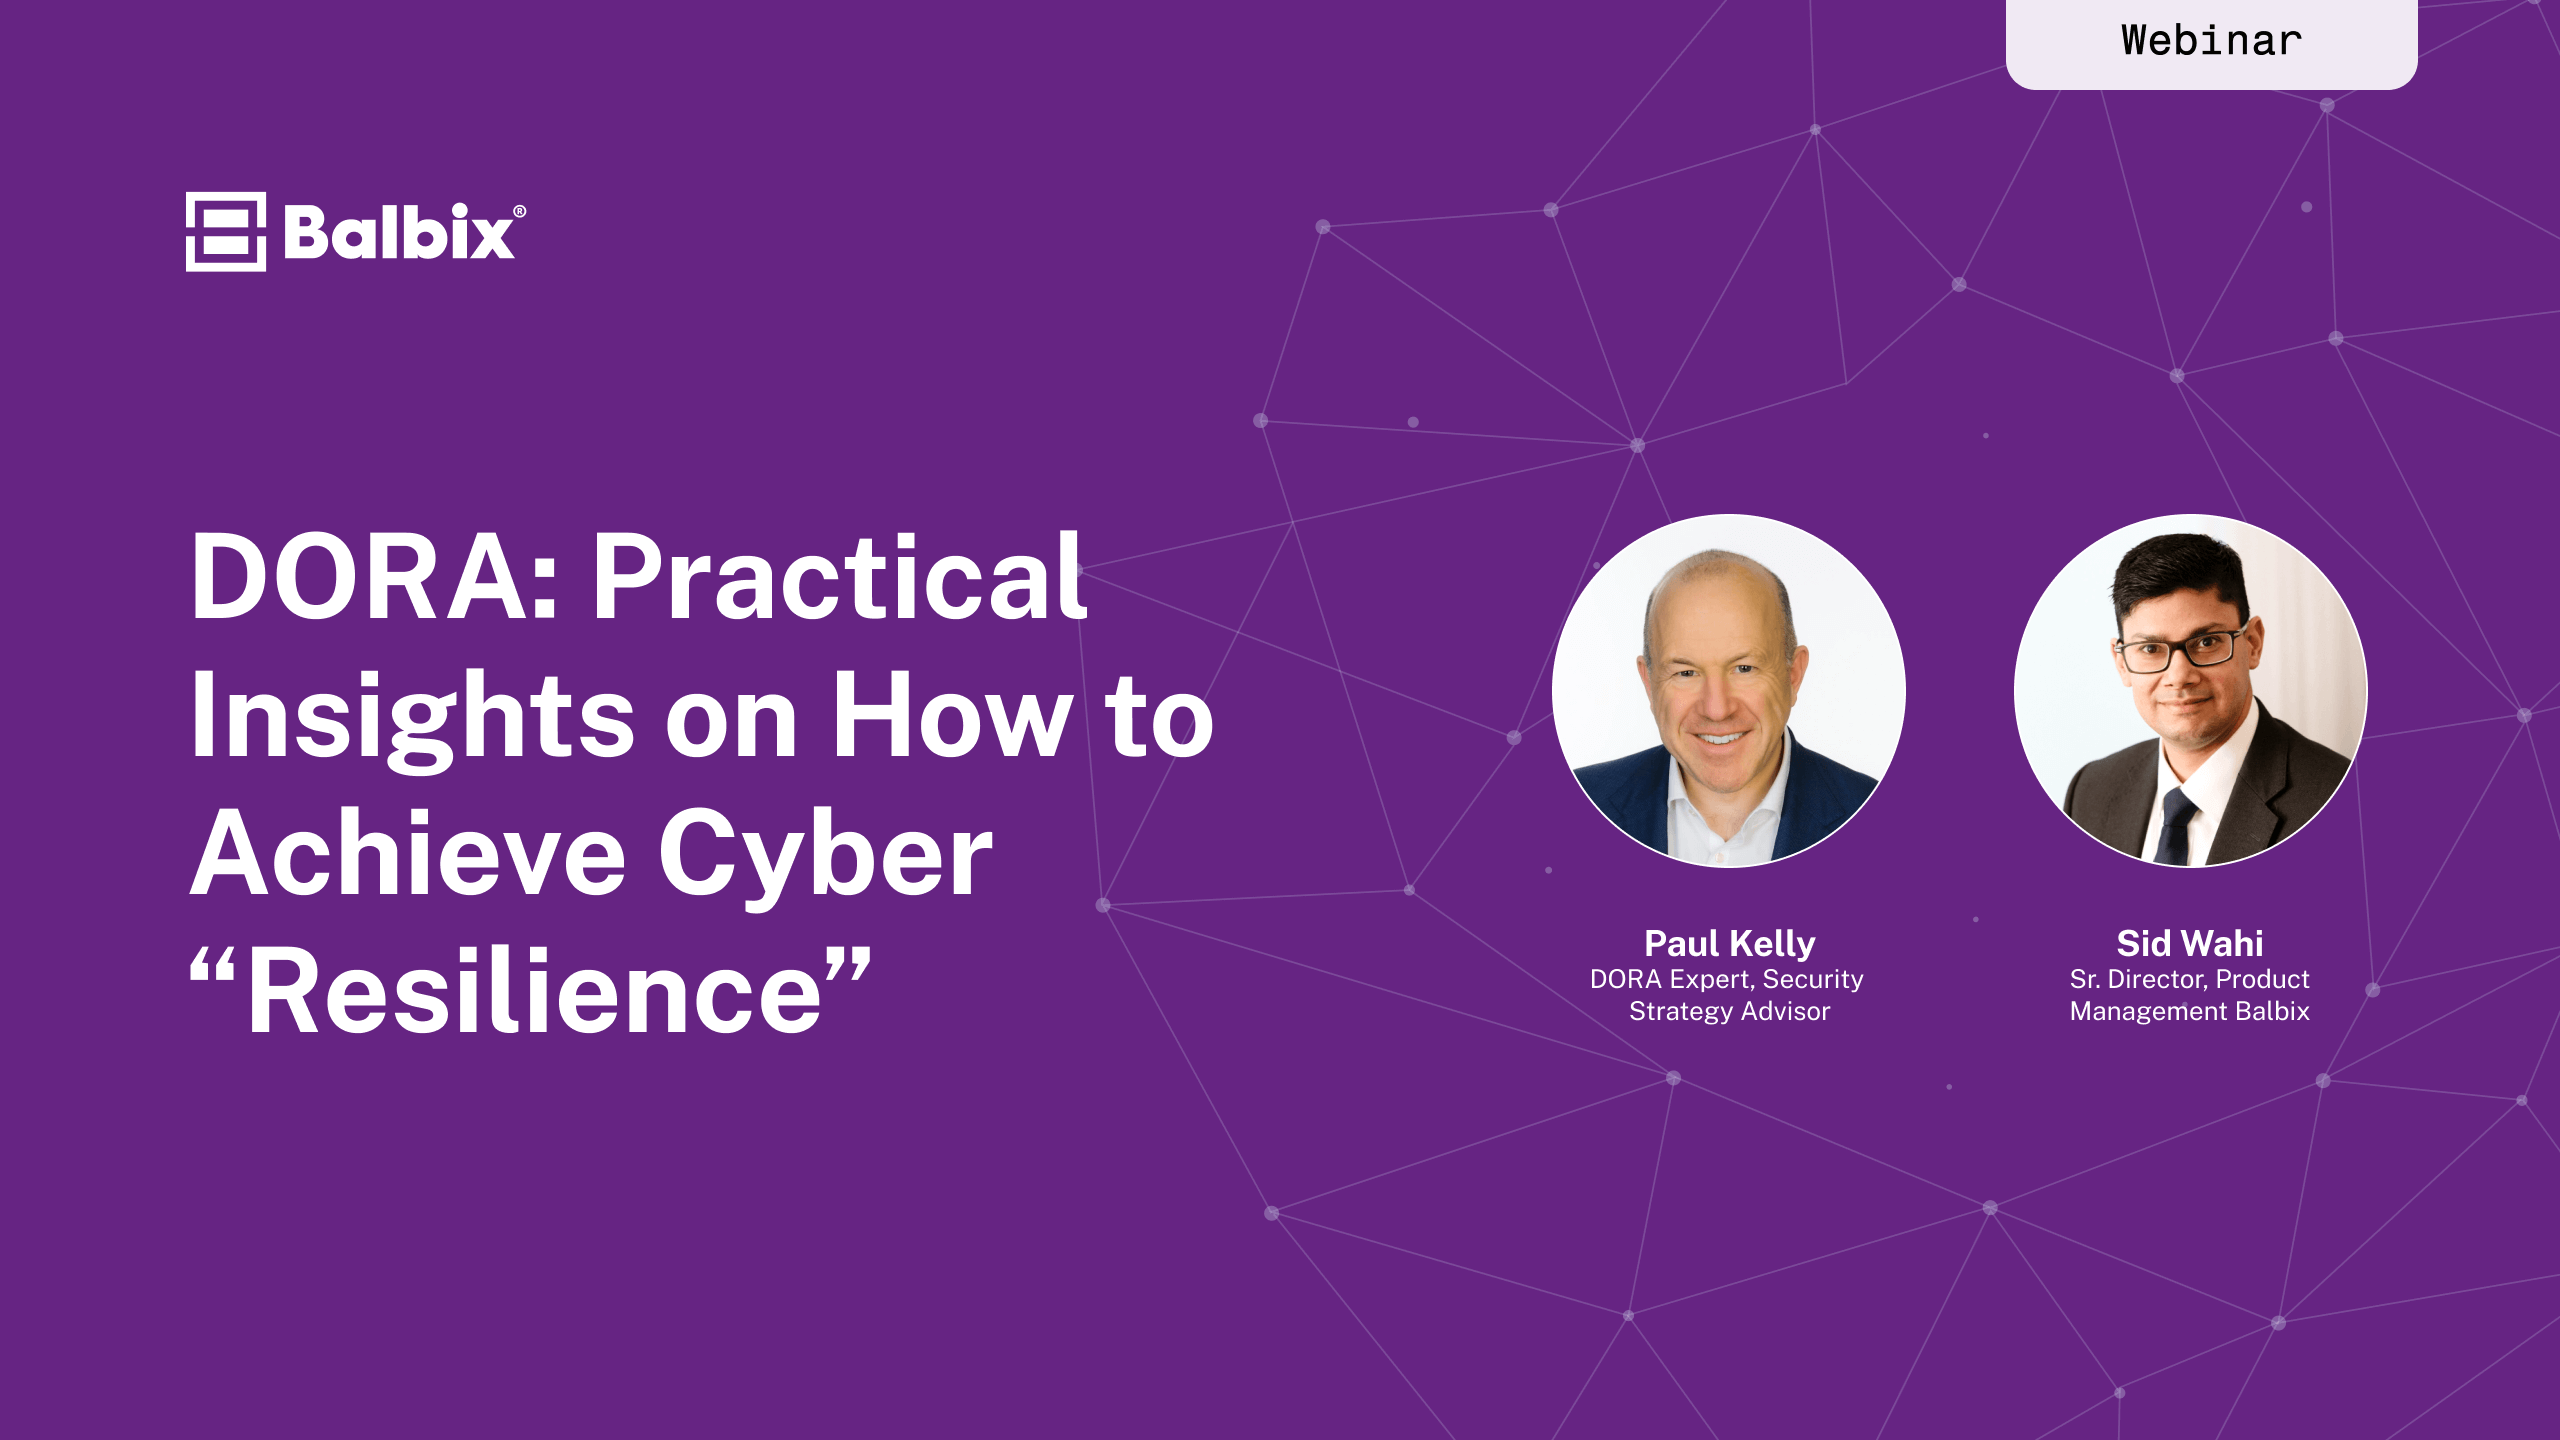 DORA: Practical Insights on How to Achieve Cyber "Resilience"